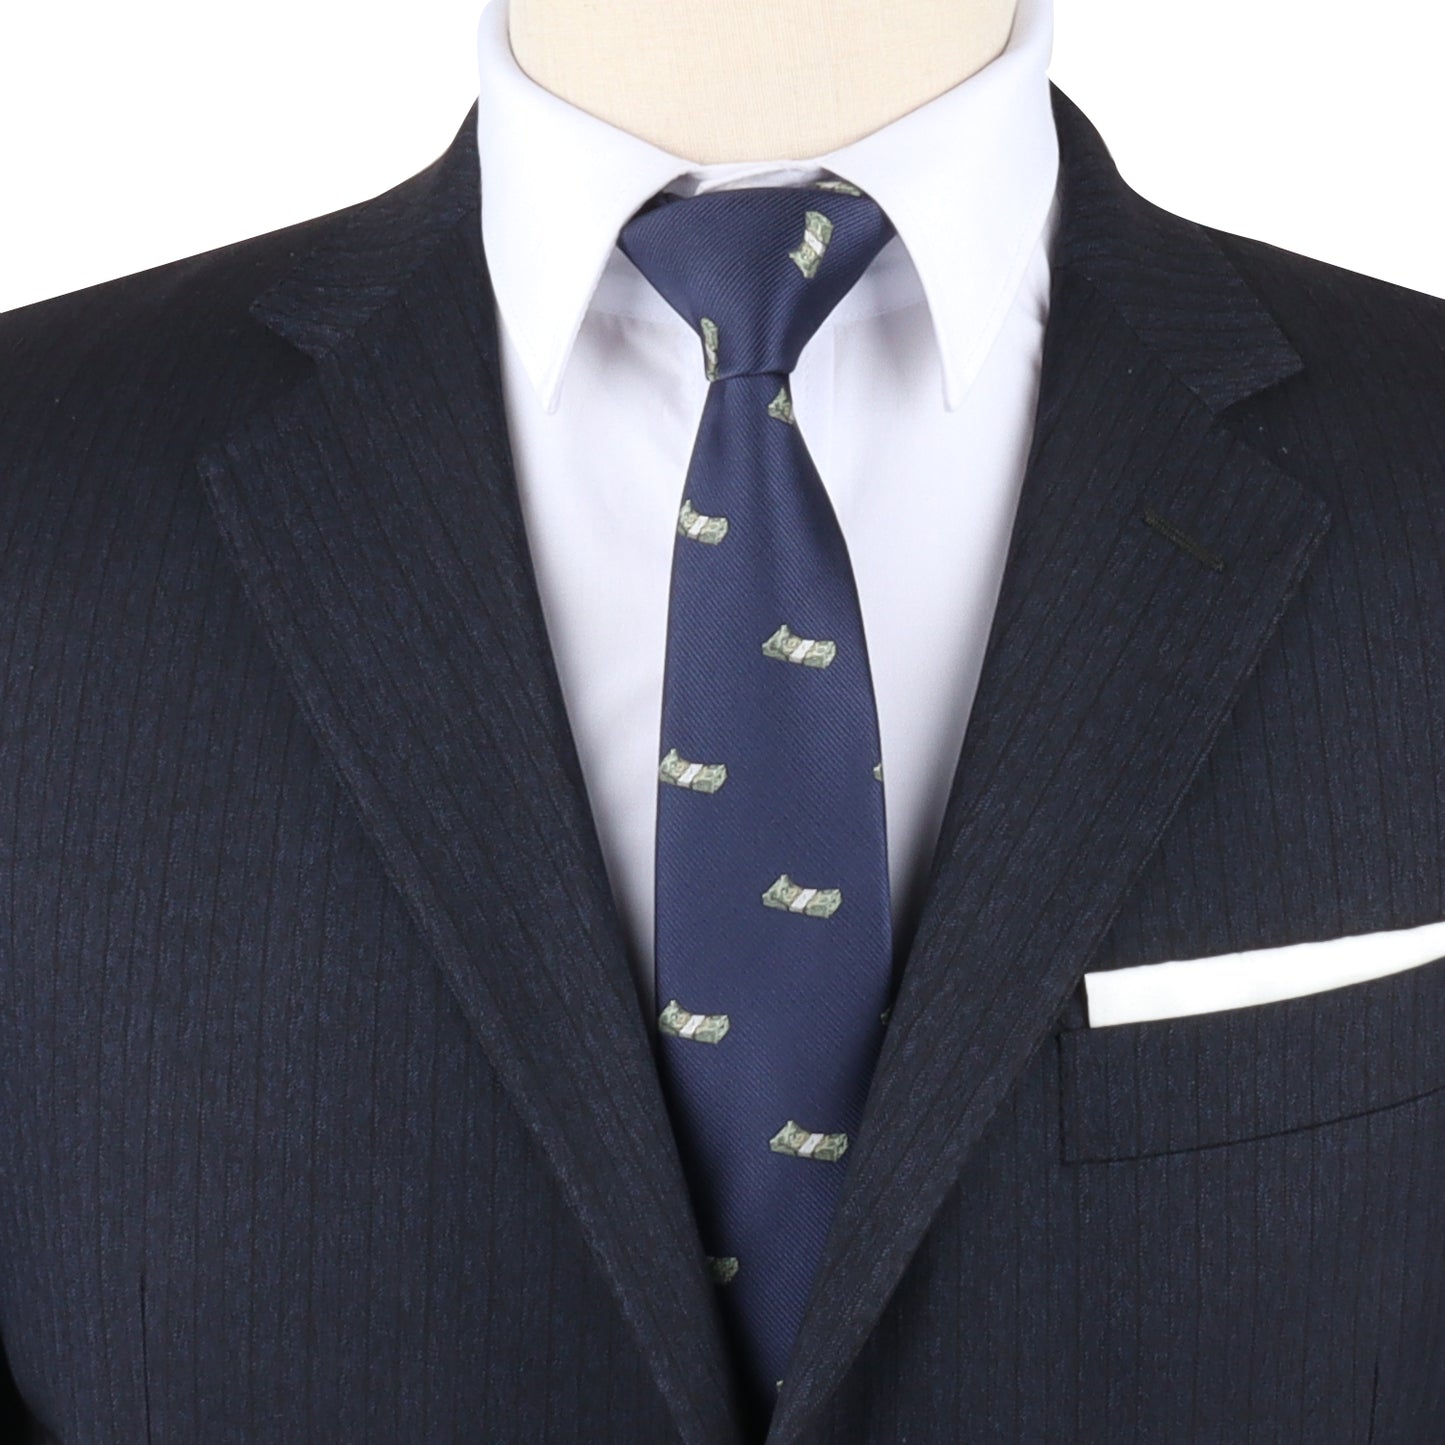 A mannequin showcasing an affluent look in a Cash Skinny Tie suit and tie.